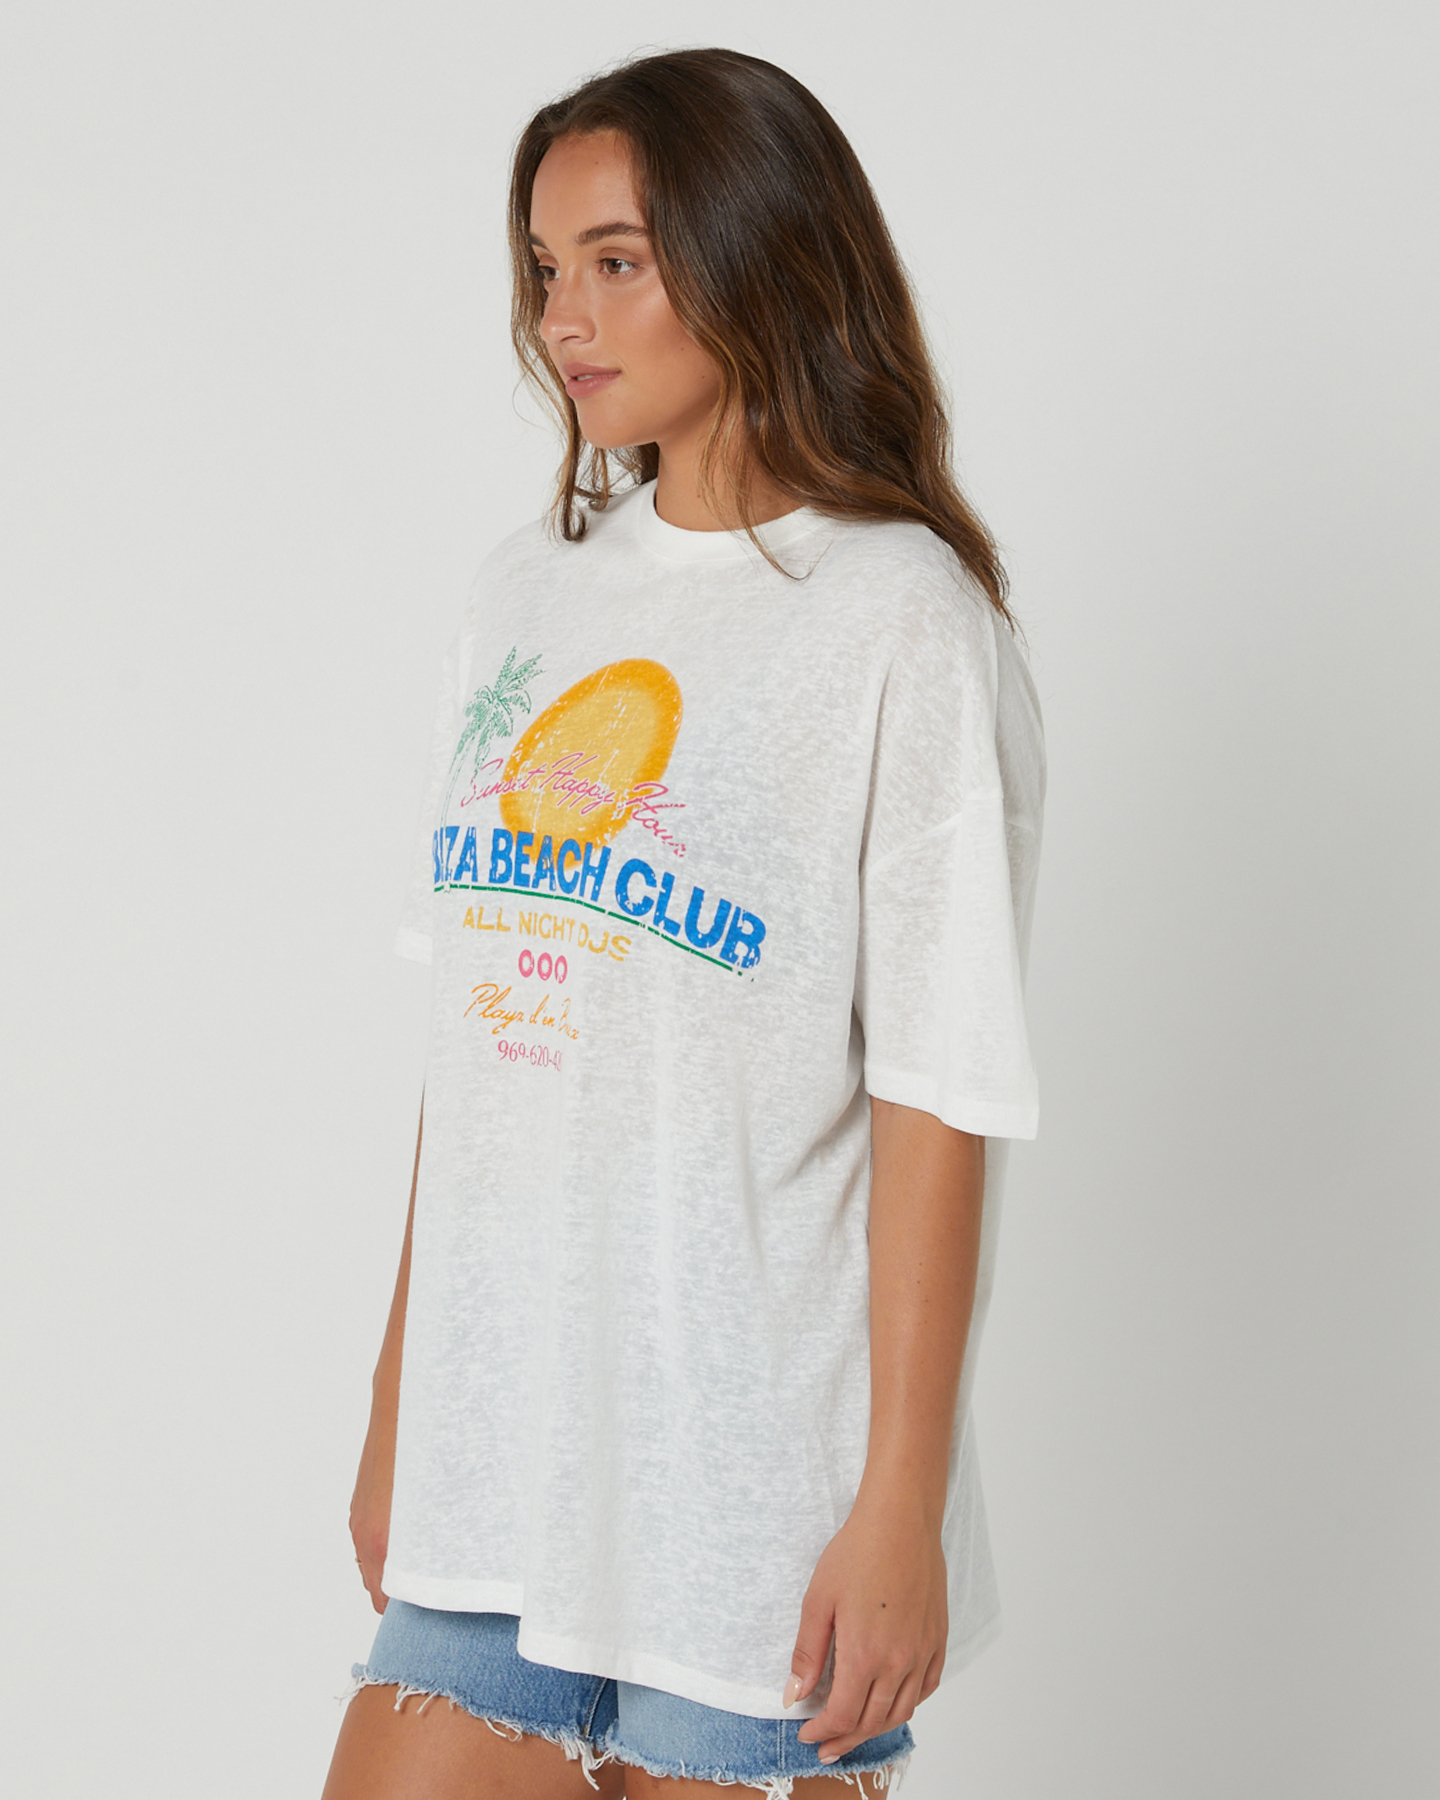 Jgr And Stn Beach Club Oversized Tee - White | SurfStitch